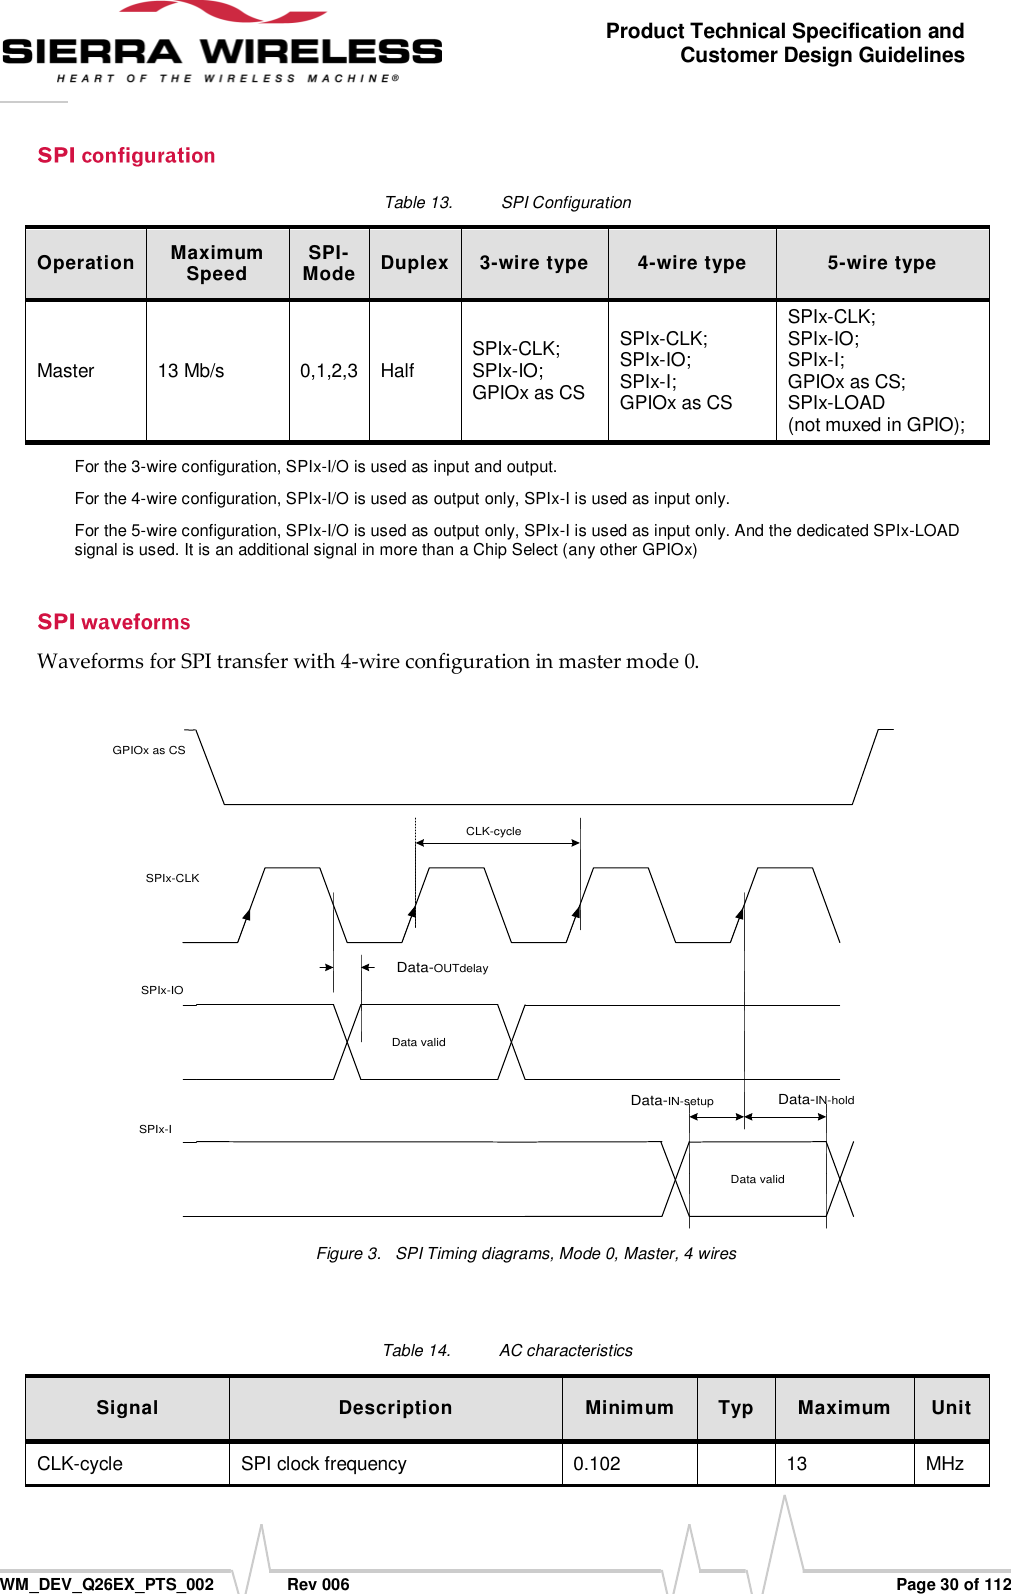      WM_DEV_Q26EX_PTS_002  Rev 006  Page 30 of 112 Product Technical Specification and Customer Design Guidelines Table 13.  SPI Configuration Operation Maximum Speed SPI-Mode Duplex 3-wire type 4-wire type 5-wire type Master 13 Mb/s 0,1,2,3 Half SPIx-CLK; SPIx-IO;  GPIOx as CS SPIx-CLK;  SPIx-IO;  SPIx-I;  GPIOx as CS SPIx-CLK;  SPIx-IO;  SPIx-I;  GPIOx as CS;  SPIx-LOAD  (not muxed in GPIO); For the 3-wire configuration, SPIx-I/O is used as input and output. For the 4-wire configuration, SPIx-I/O is used as output only, SPIx-I is used as input only. For the 5-wire configuration, SPIx-I/O is used as output only, SPIx-I is used as input only. And the dedicated SPIx-LOAD signal is used. It is an additional signal in more than a Chip Select (any other GPIOx) Waveforms for SPI transfer with 4-wire configuration in master mode 0.  Data-OUTdelayCLK-cycleData-IN-holdData-IN-setupSPIx-IOData validData validSPIx-CLKSPIx-IGPIOx as CS Figure 3.  SPI Timing diagrams, Mode 0, Master, 4 wires  Table 14.  AC characteristics Signal Description Minimum Typ Maximum Unit CLK-cycle SPI clock frequency  0.102  13 MHz 